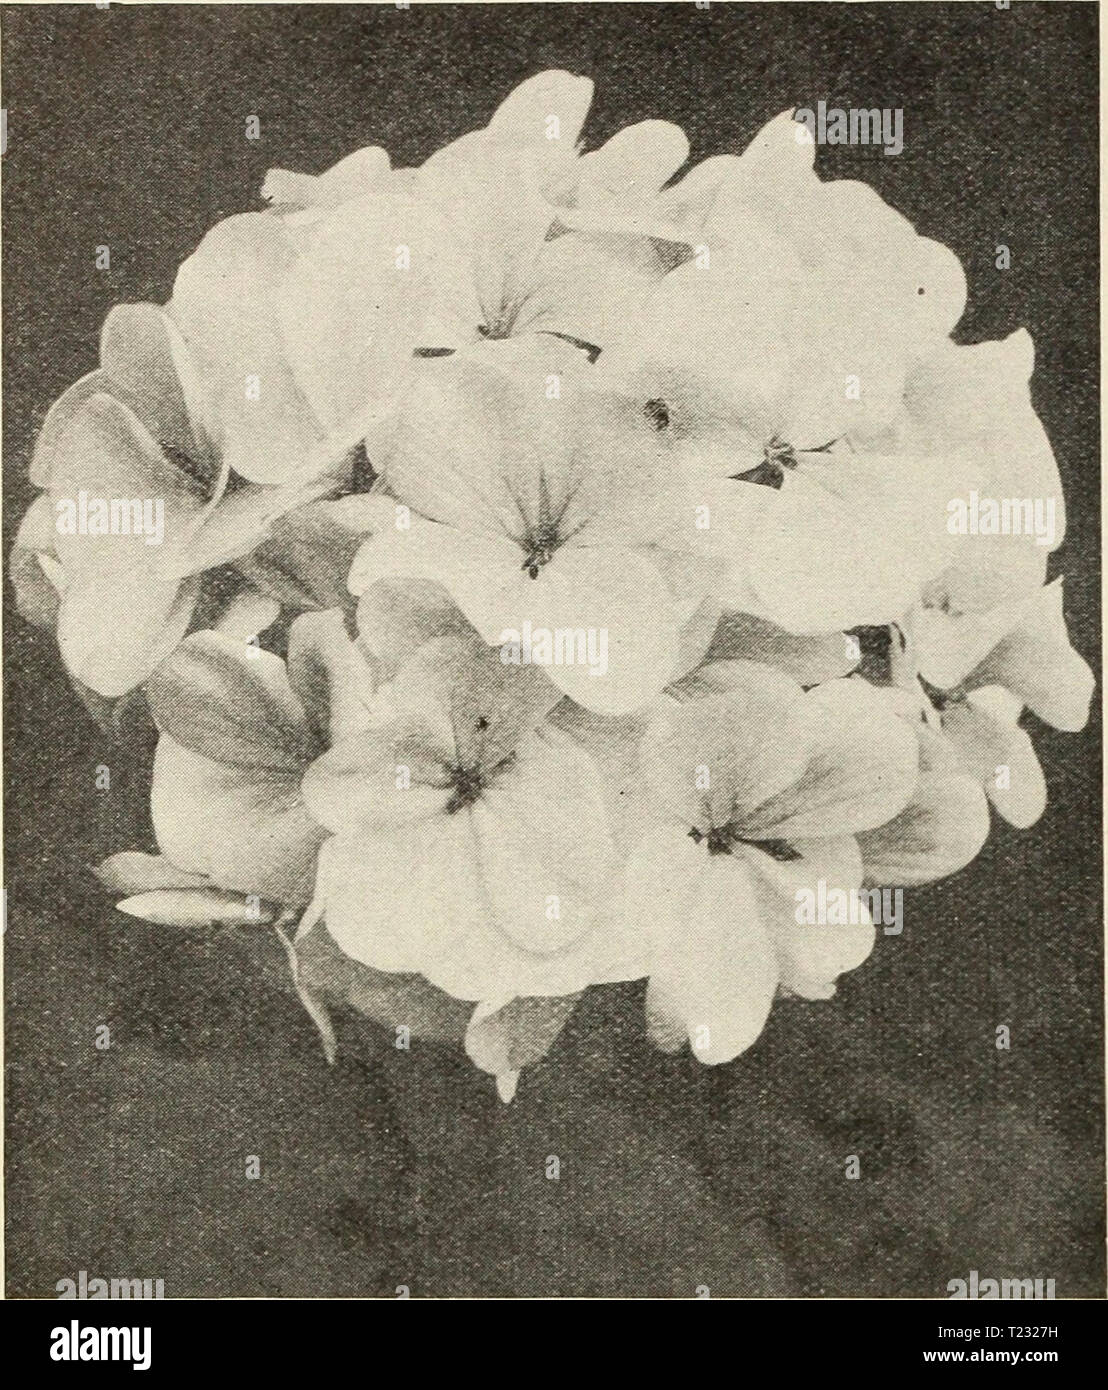 Archive image from page 77 of Dingee guide to rose culture Dingee guide to rose culture  dingeeguidetoros19ding 4 Year: 1913  Sing-le Geranium. Choice Dingee Geraniums The Best New Double Graniums Prices, strong plants, 15 cts. each, 4 for 50 cts.; $1.00 for set of 10. Jean Viand. Soft, pink, white blotches. Donble New Life. Outer flowers brilliant red; cen- ter pure white flowers. E. H. Trego. Dazzling scarlet, velvety. Alphonse Ricard. Semi-double; orange-red. Thomas Meehan (New Bruant Geranium). Semi- double, bright magenta. Superb. Beaute Poitevine. Bright salmon-pink. S. A. Nutt. Rich, da Stock Photo